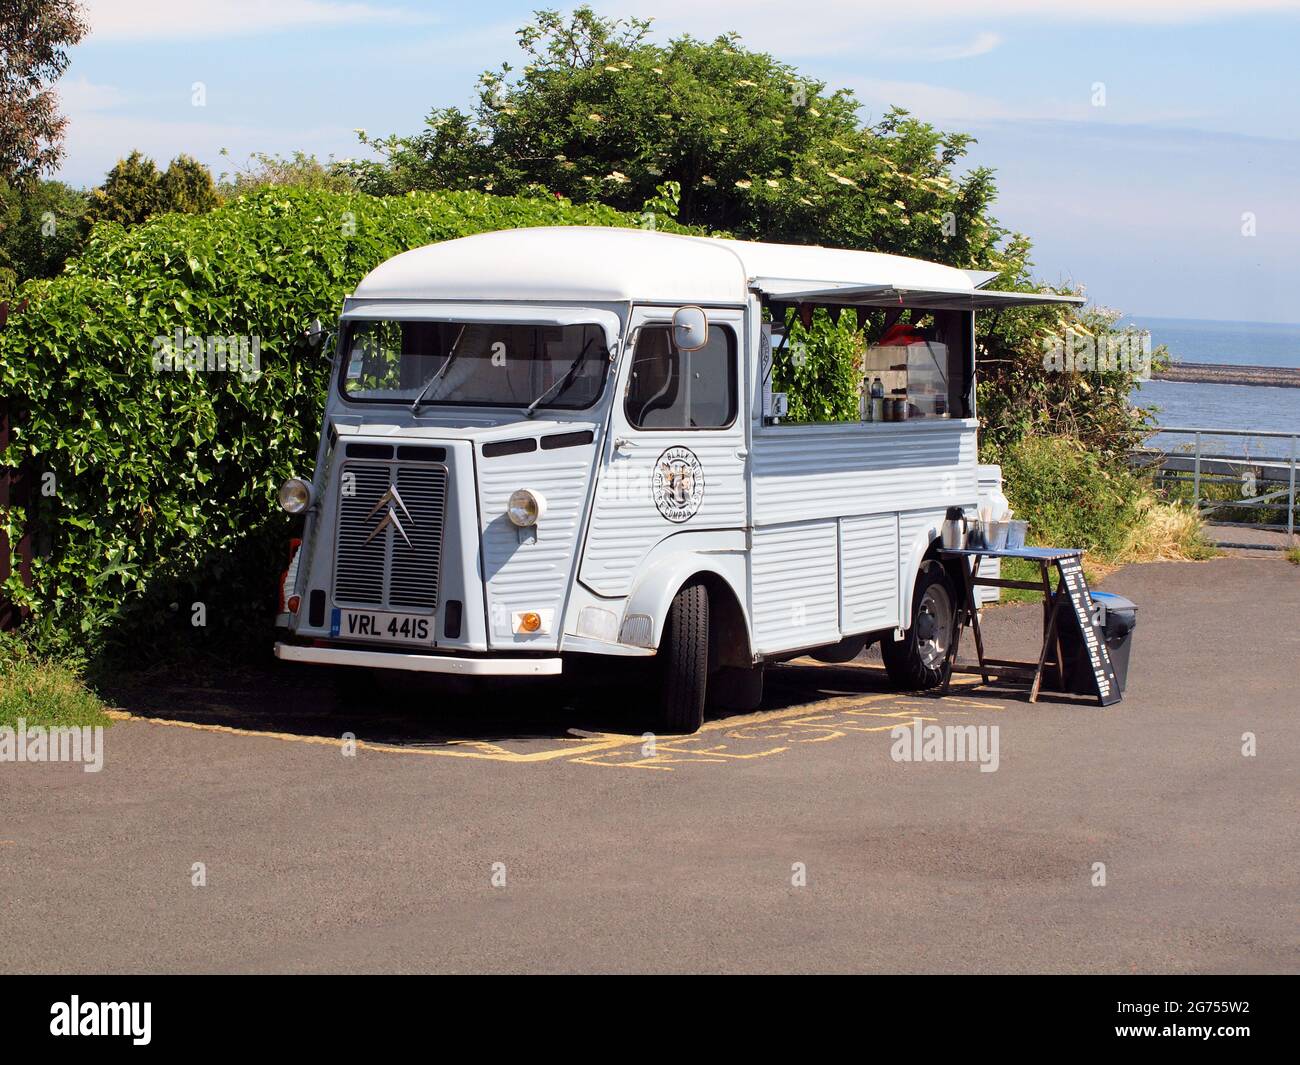 A vintage Citroen H.Y. four door pane light commercial van selling hot and cold food beverages at a Tynemouth seaside location in the UK. Stock Photo